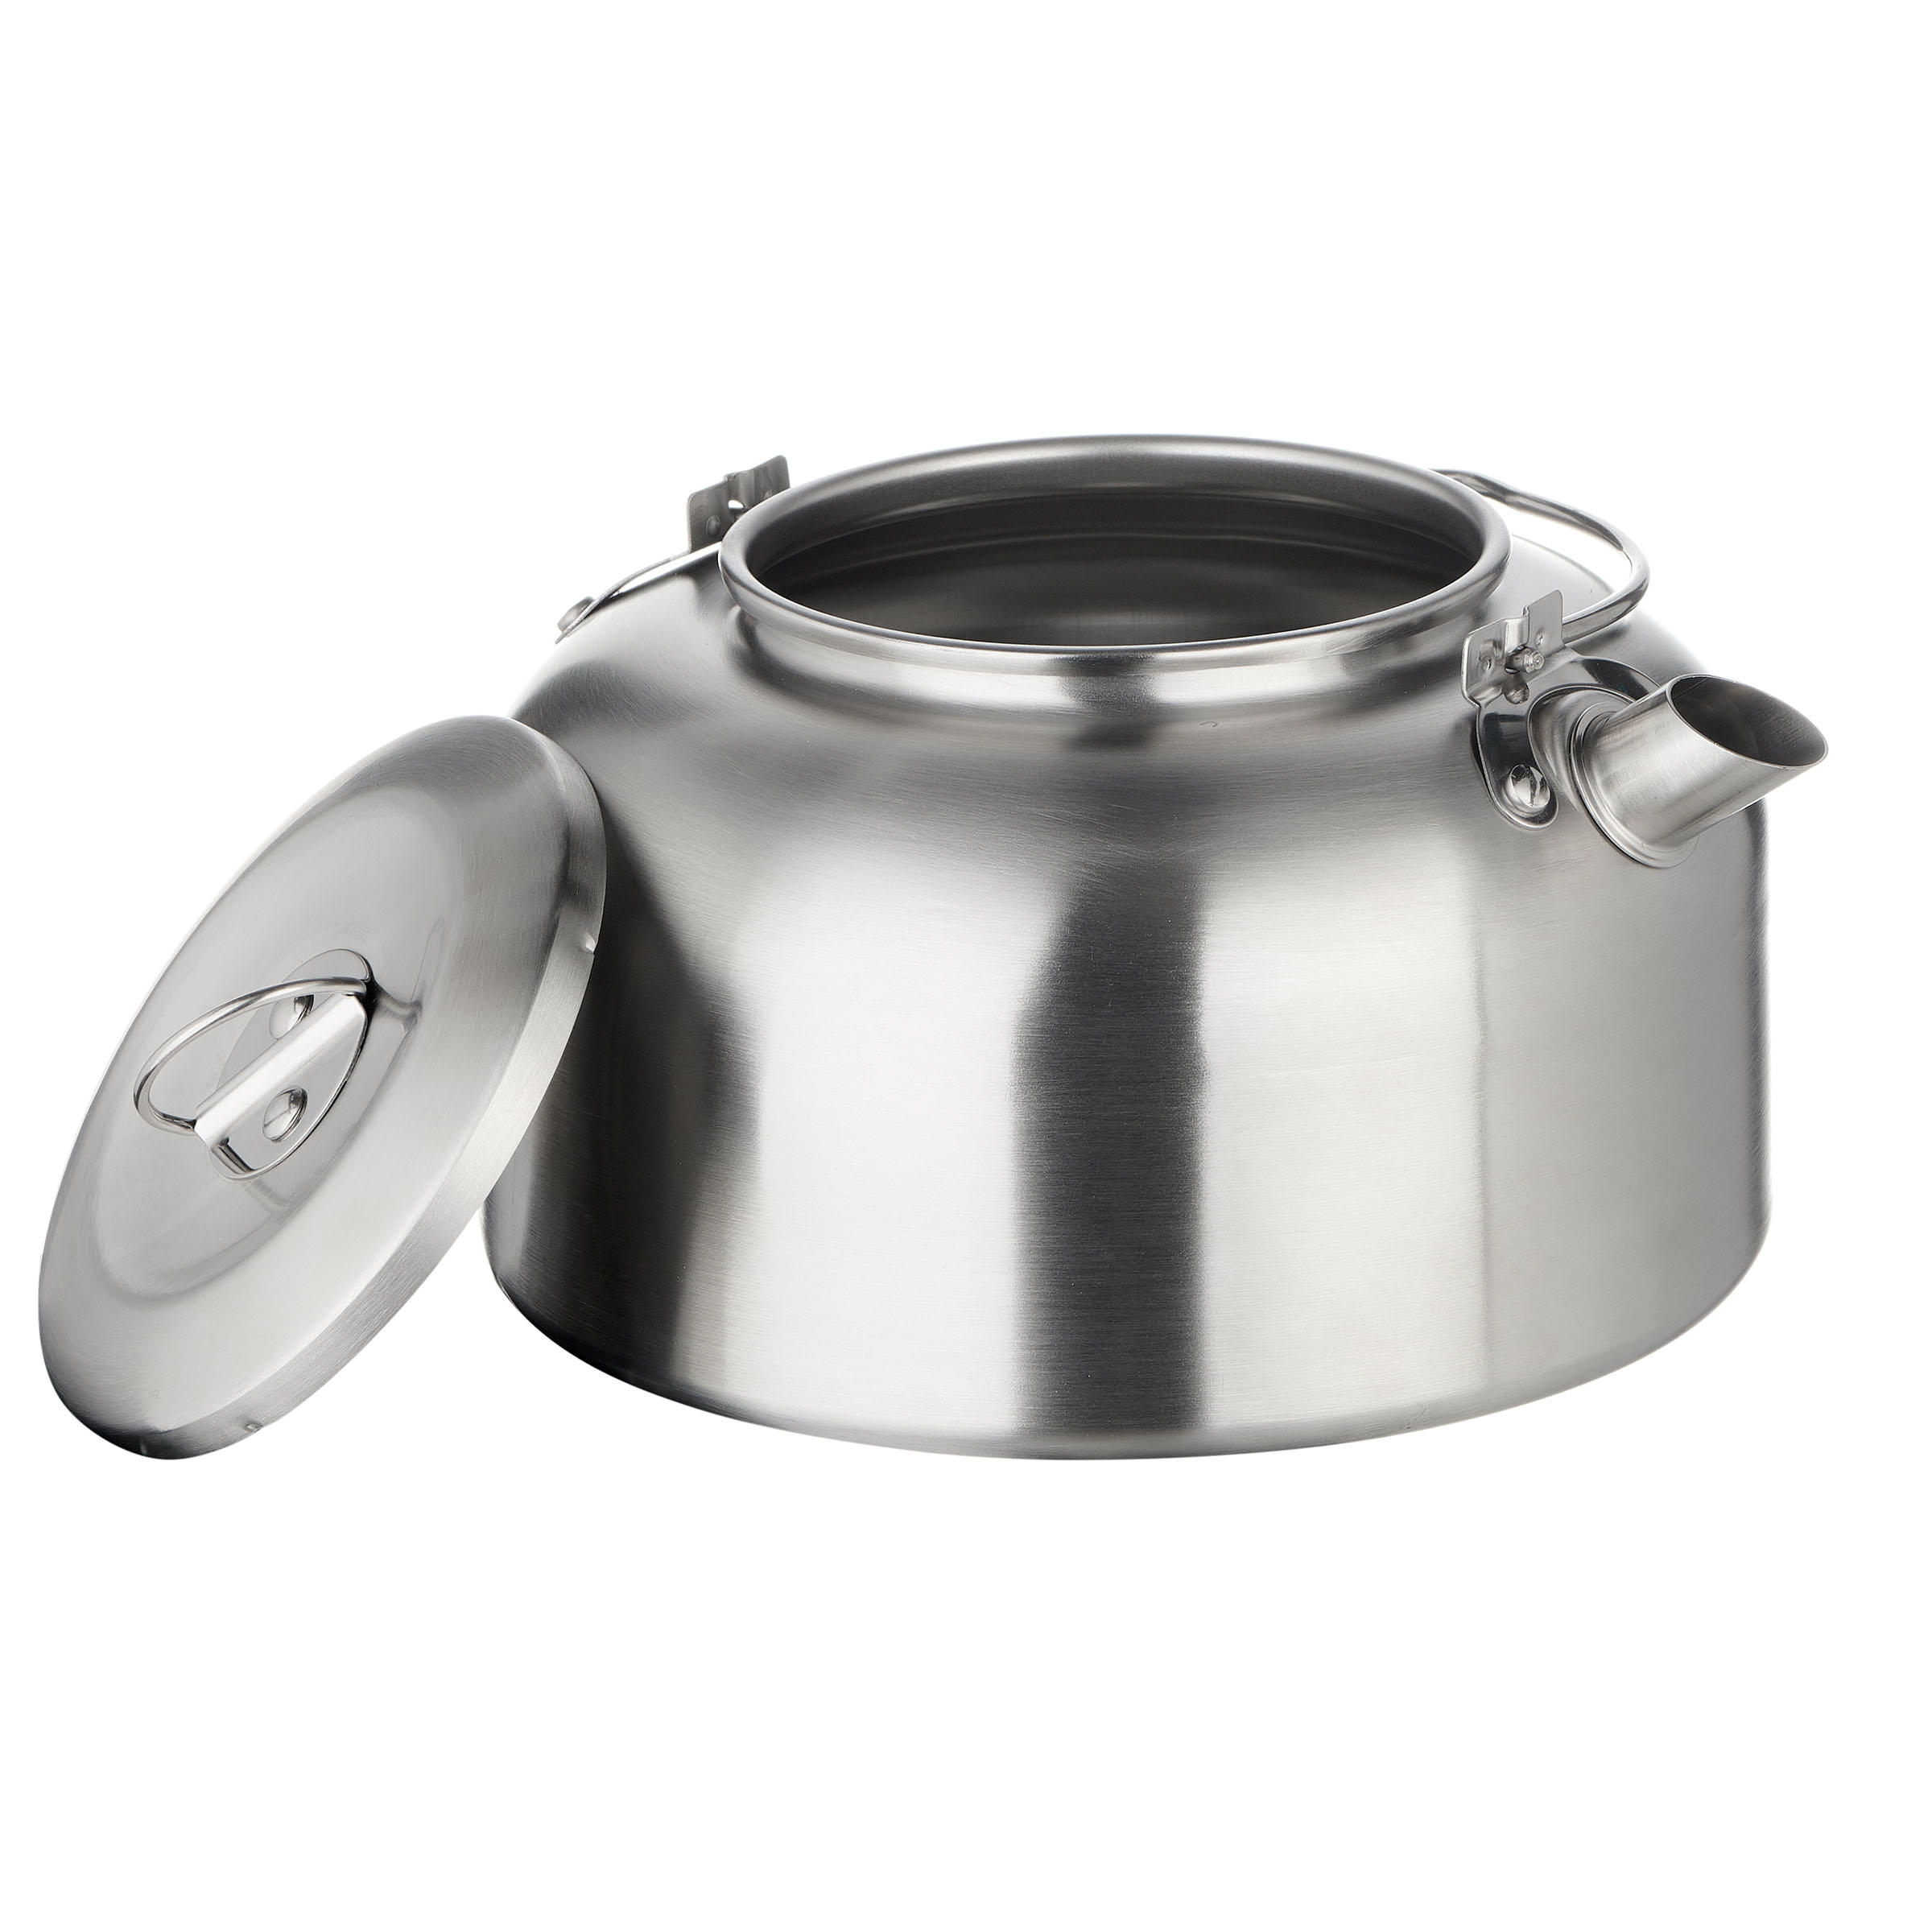 MH500 Camping Kettle in Stainless Steel 1 L - QUECHUA